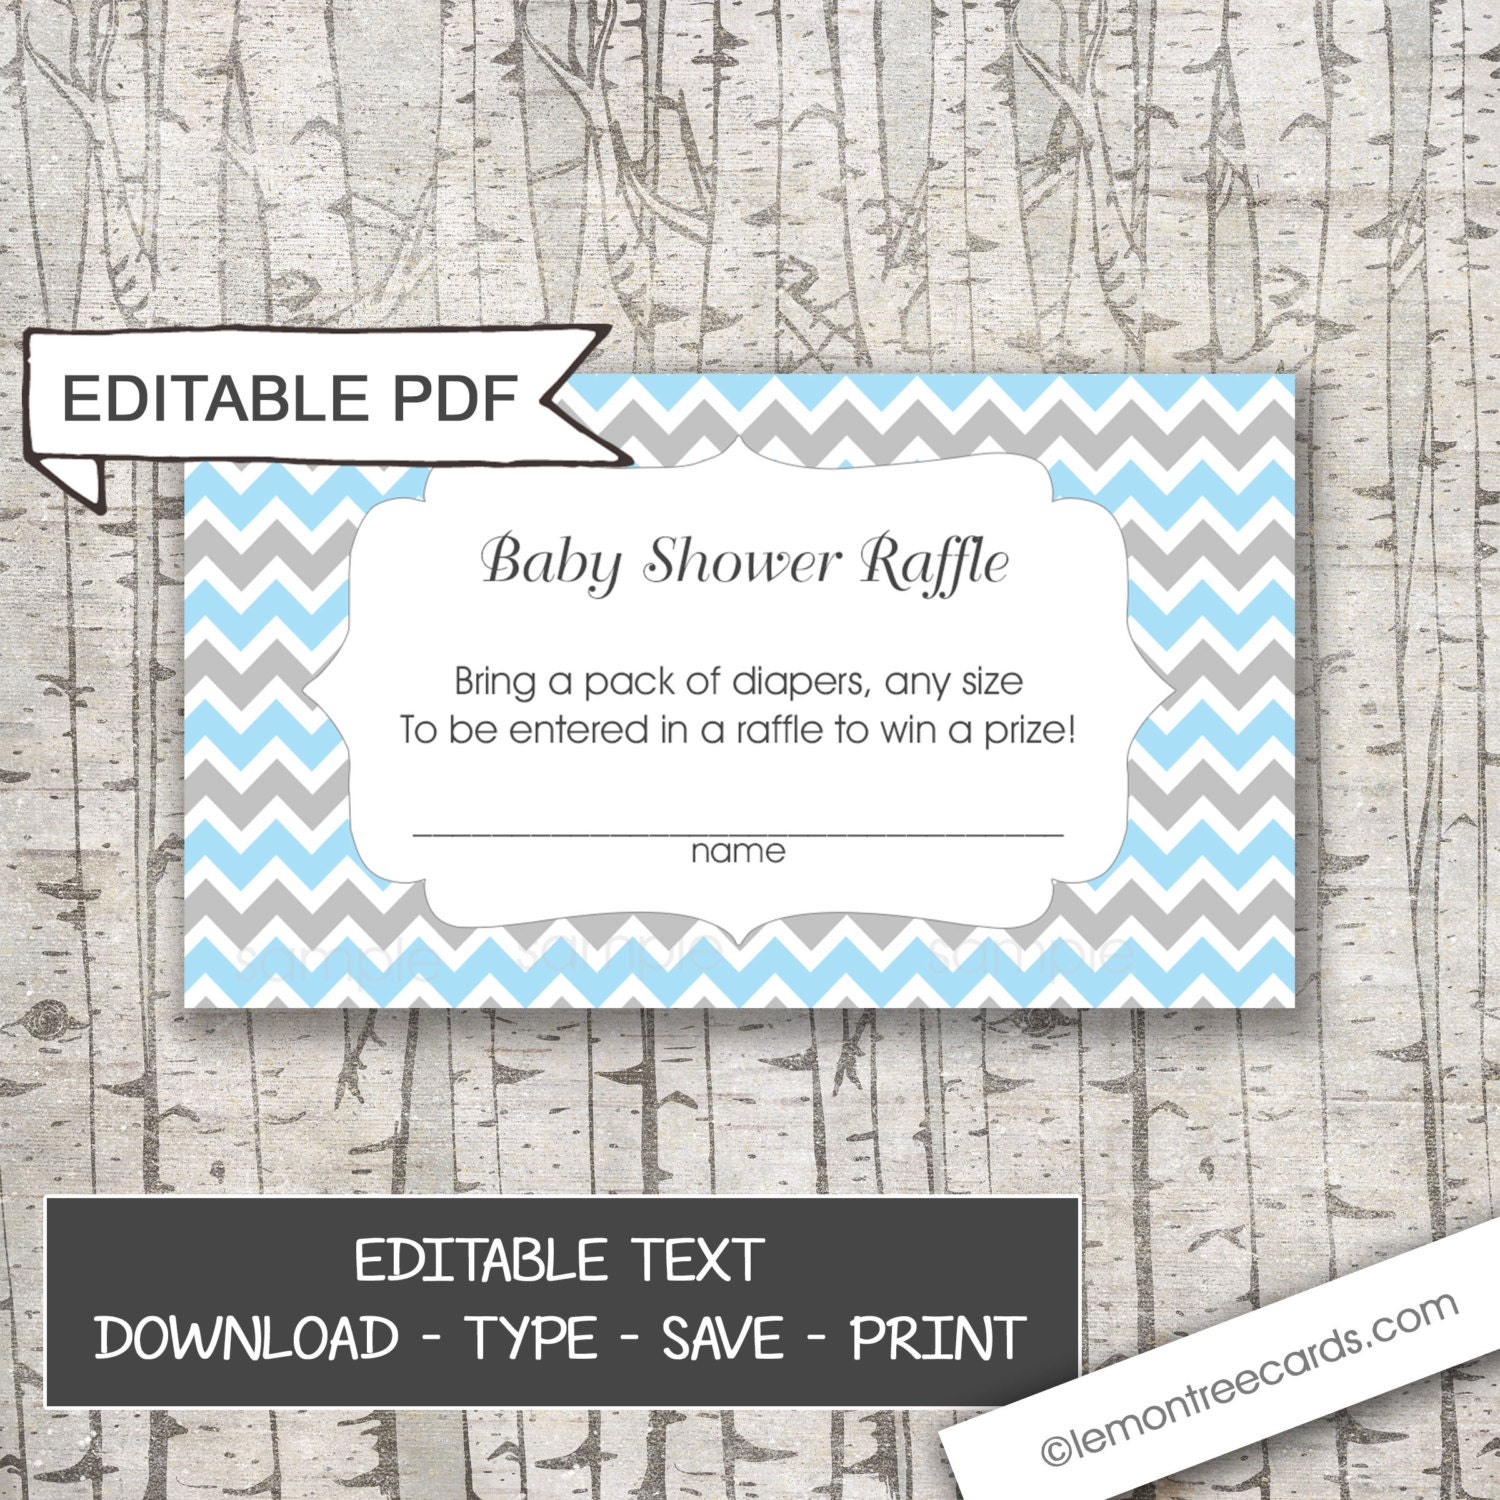 editable baby shower diaper raffle tickets you edit the